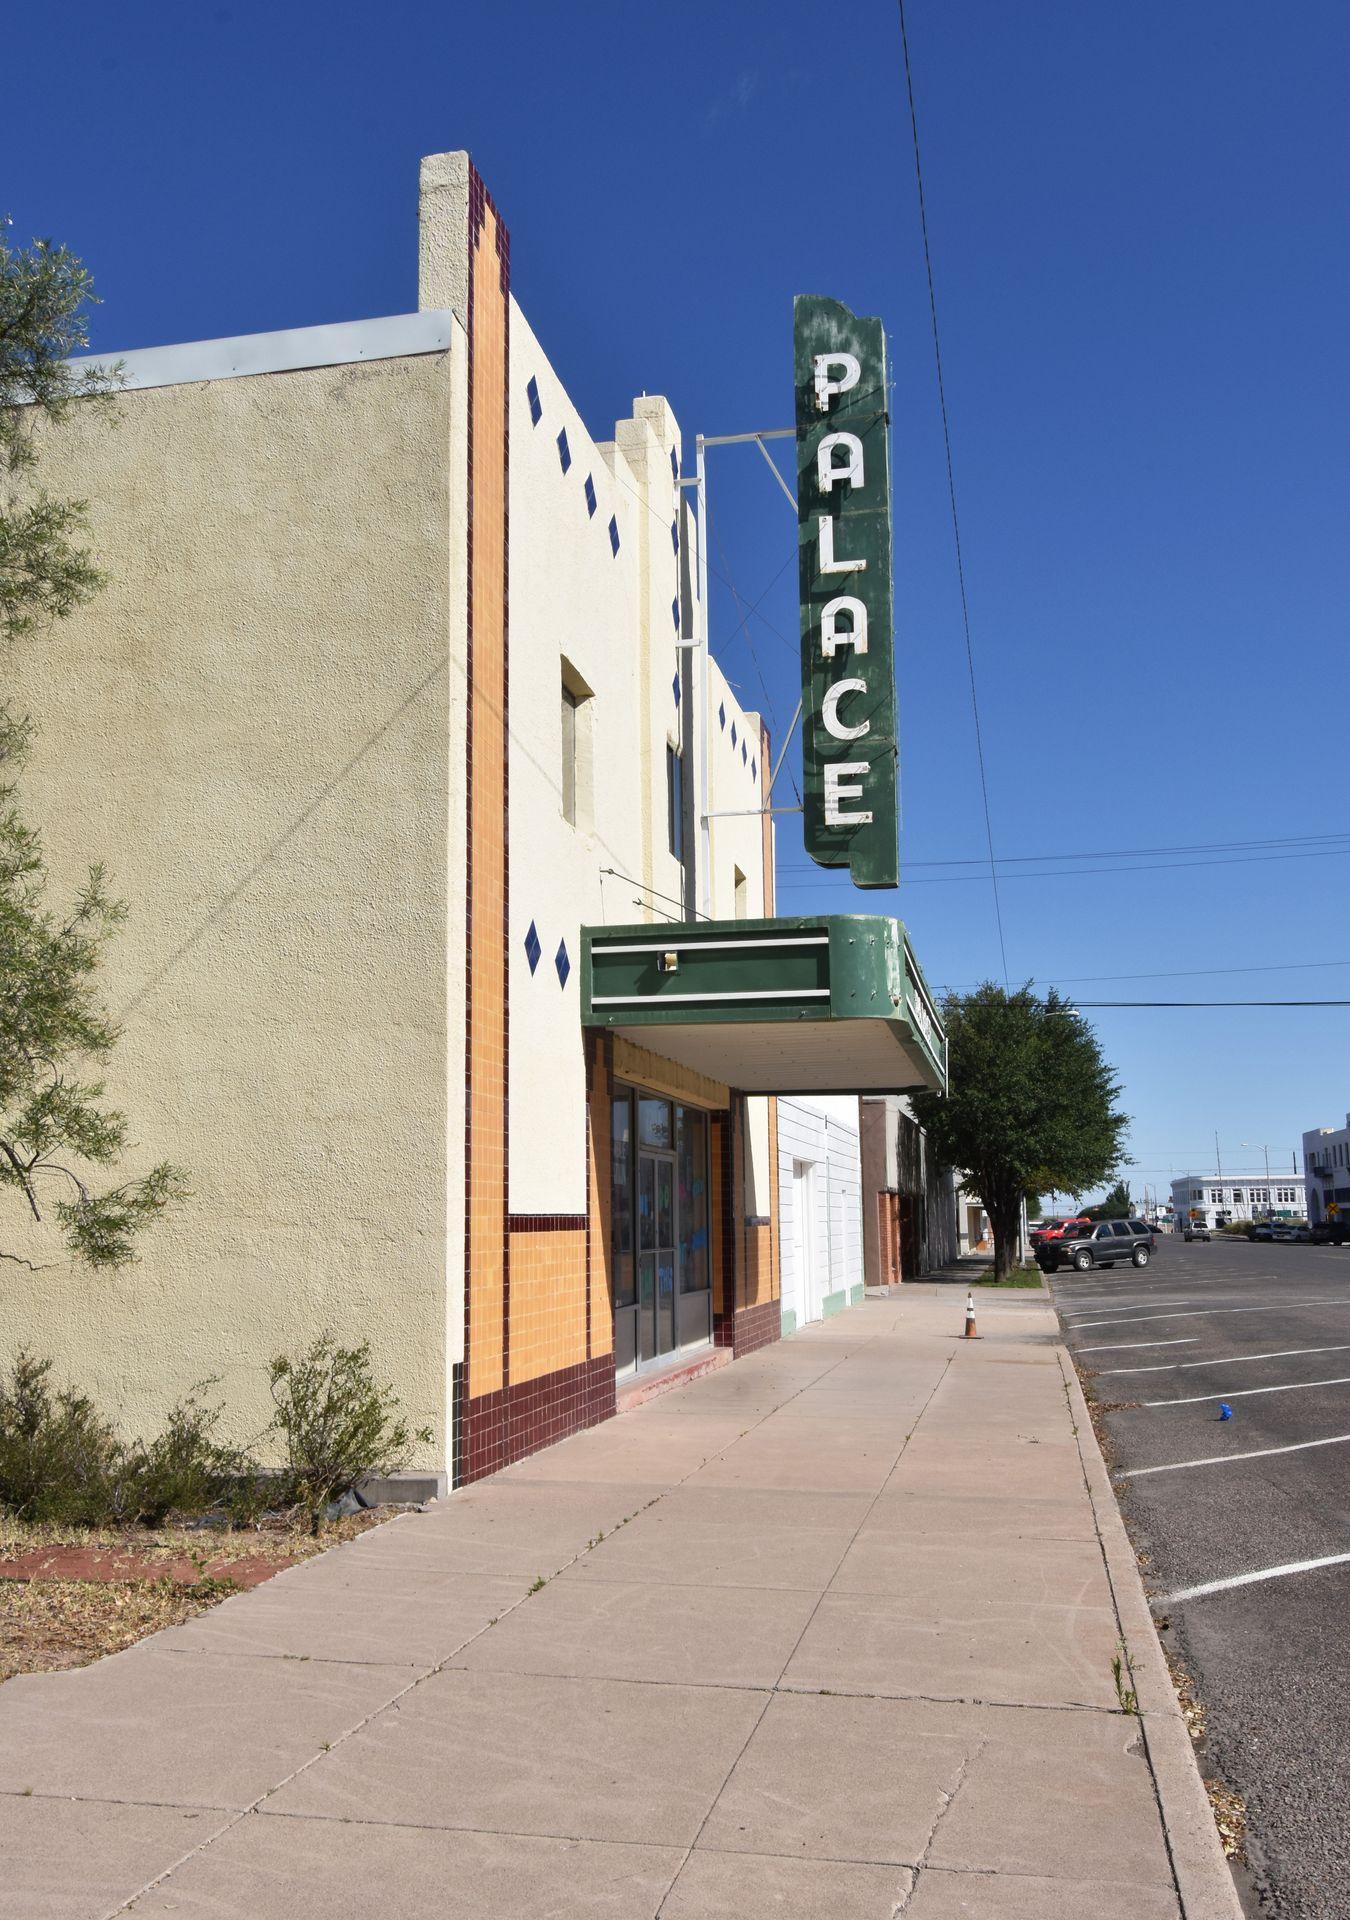 The exterior of the Palace theater. It is a white building with an orange design and a green sign.